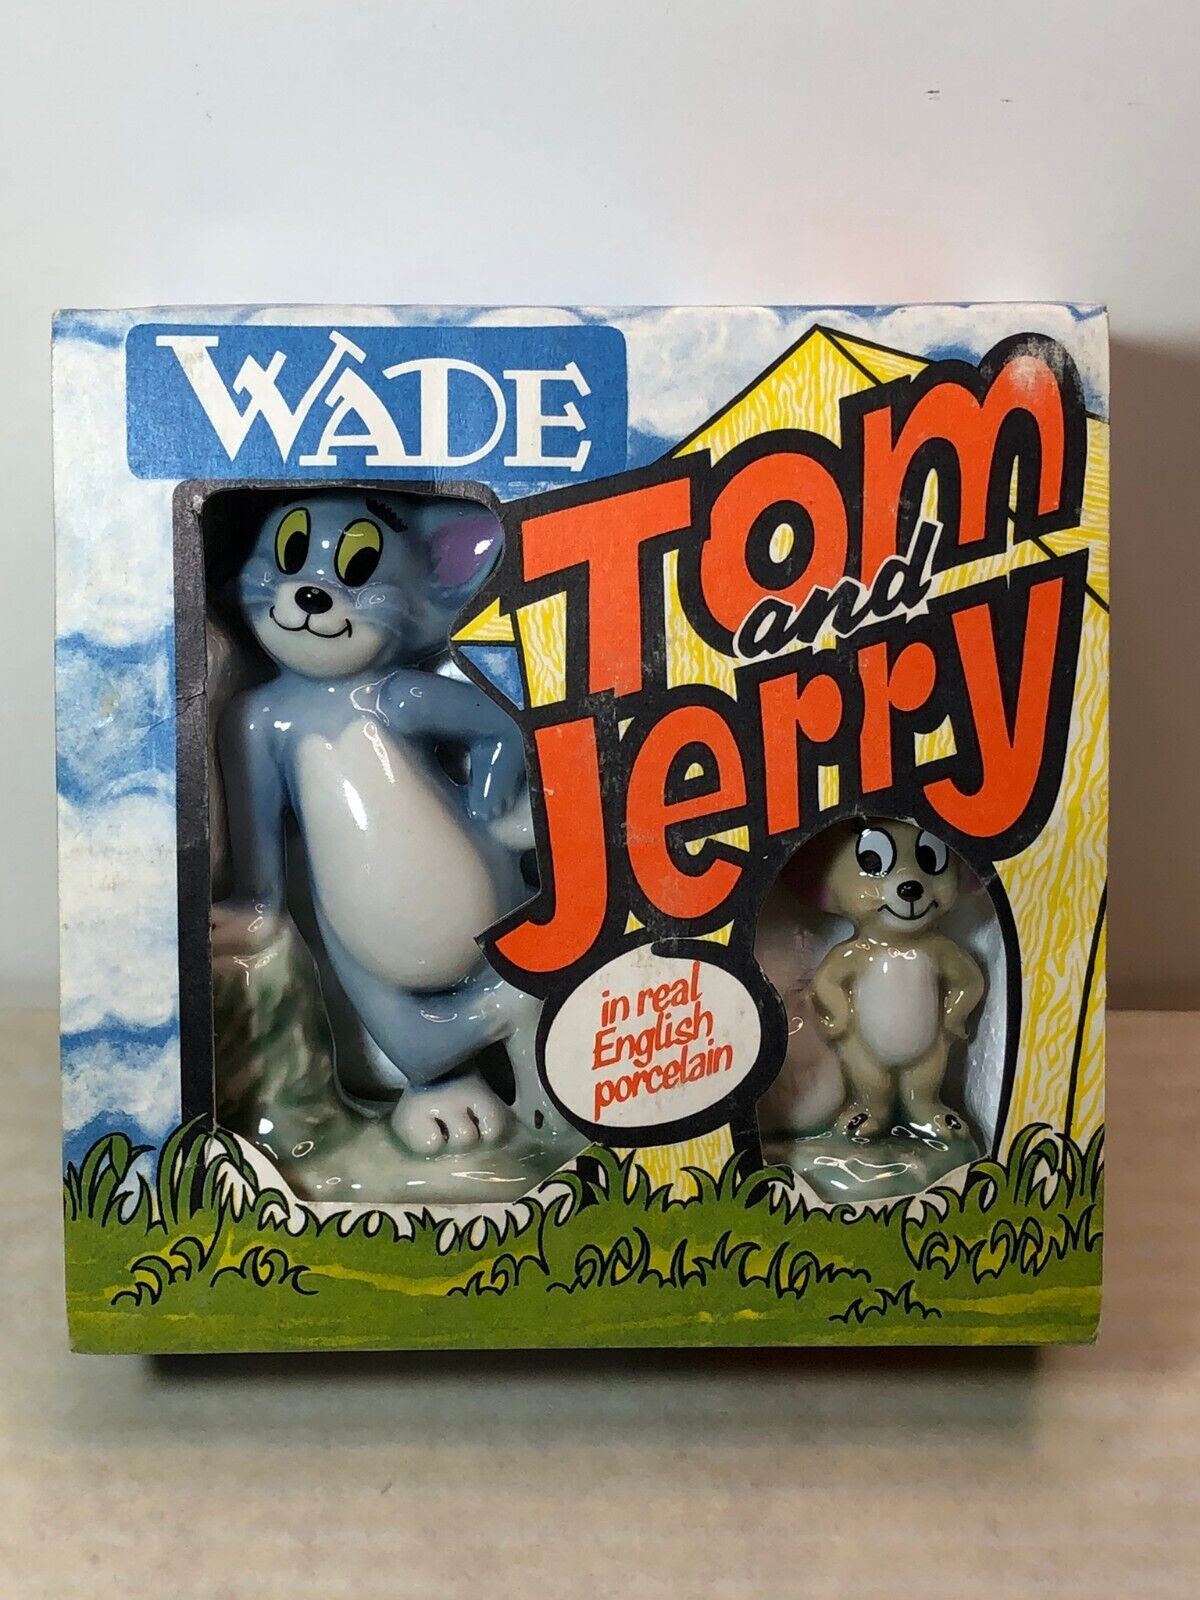 WADE TOM AND JERRY ENGLISH PORCELAIN FIGURINES MADE IN ENGLAND 1973 MGM